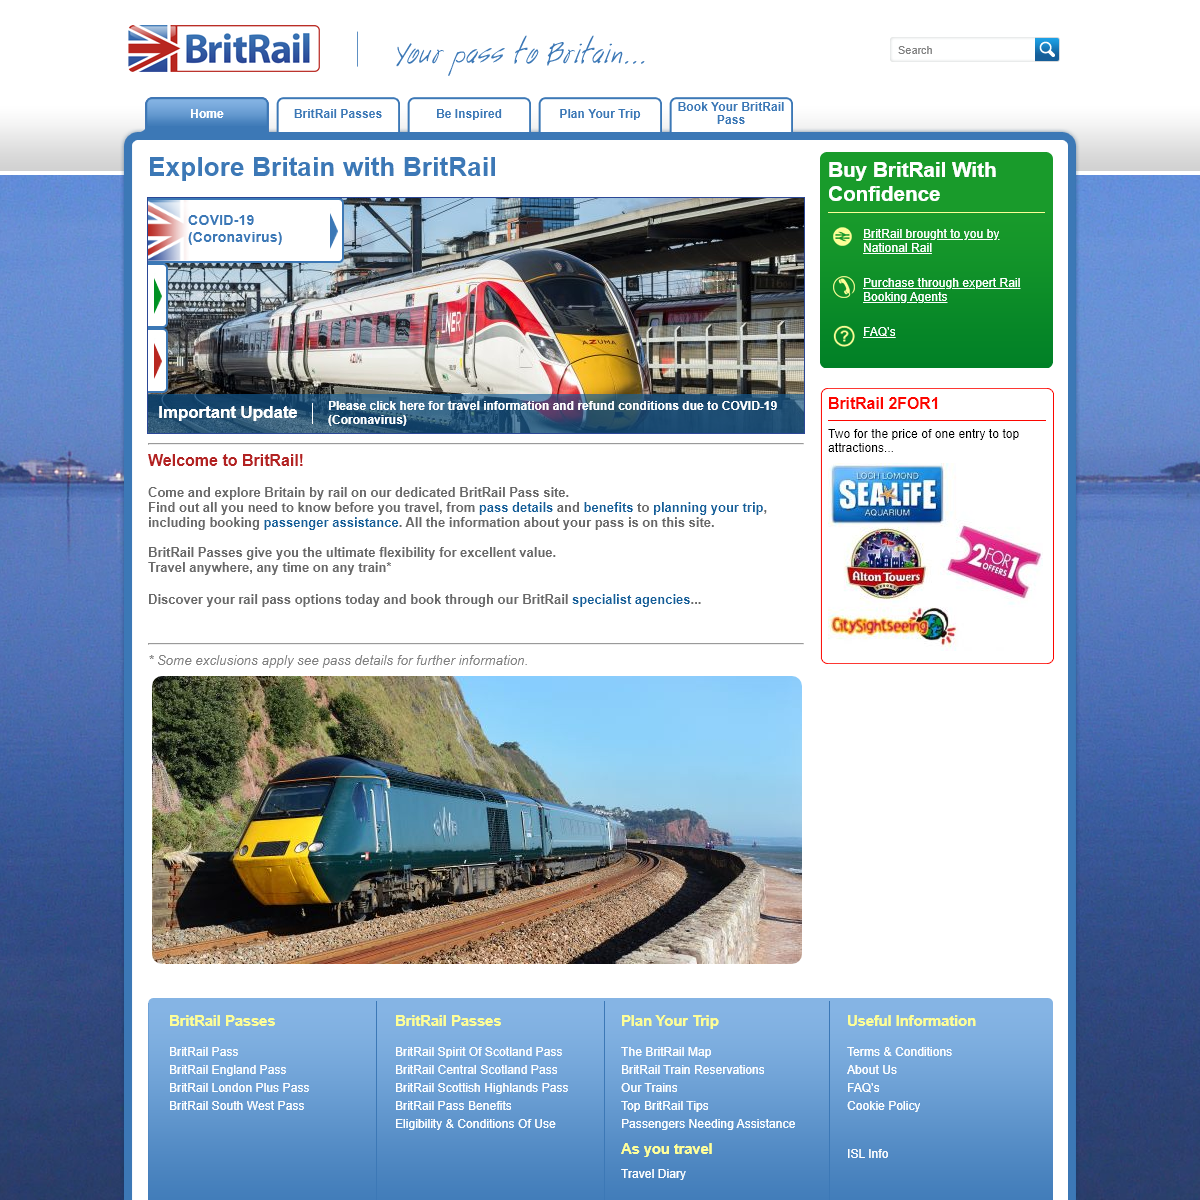 A complete backup of britrail.com